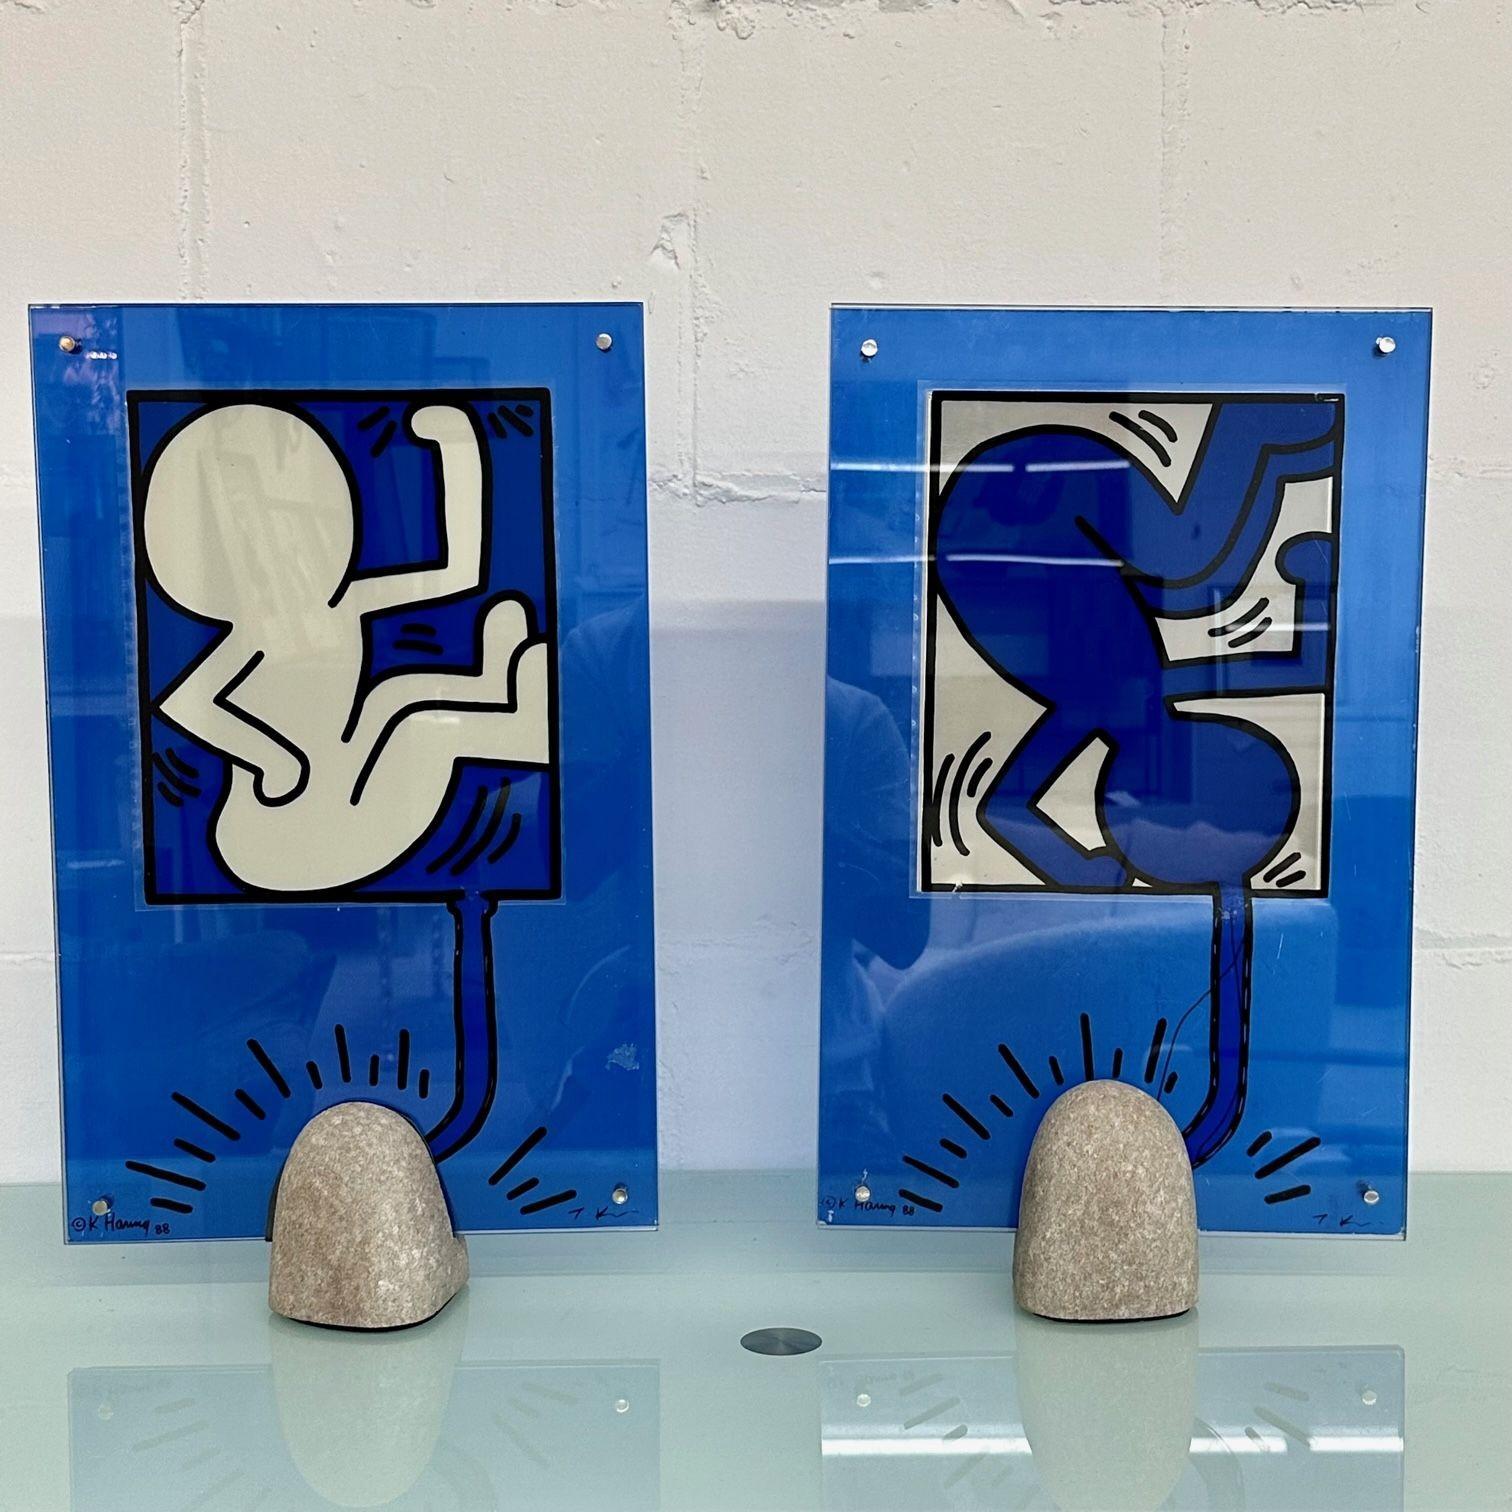 Pair of Mid-Century Modern Keith Haring Signed Lamps / Sculpture, Toshiyuki Kita
Limited edition Keith Haring and Toshiyuki Kita lamp. Comprised of reverse screen printed glass and stone. Signed and dated on the lower left hand corner.
Screen